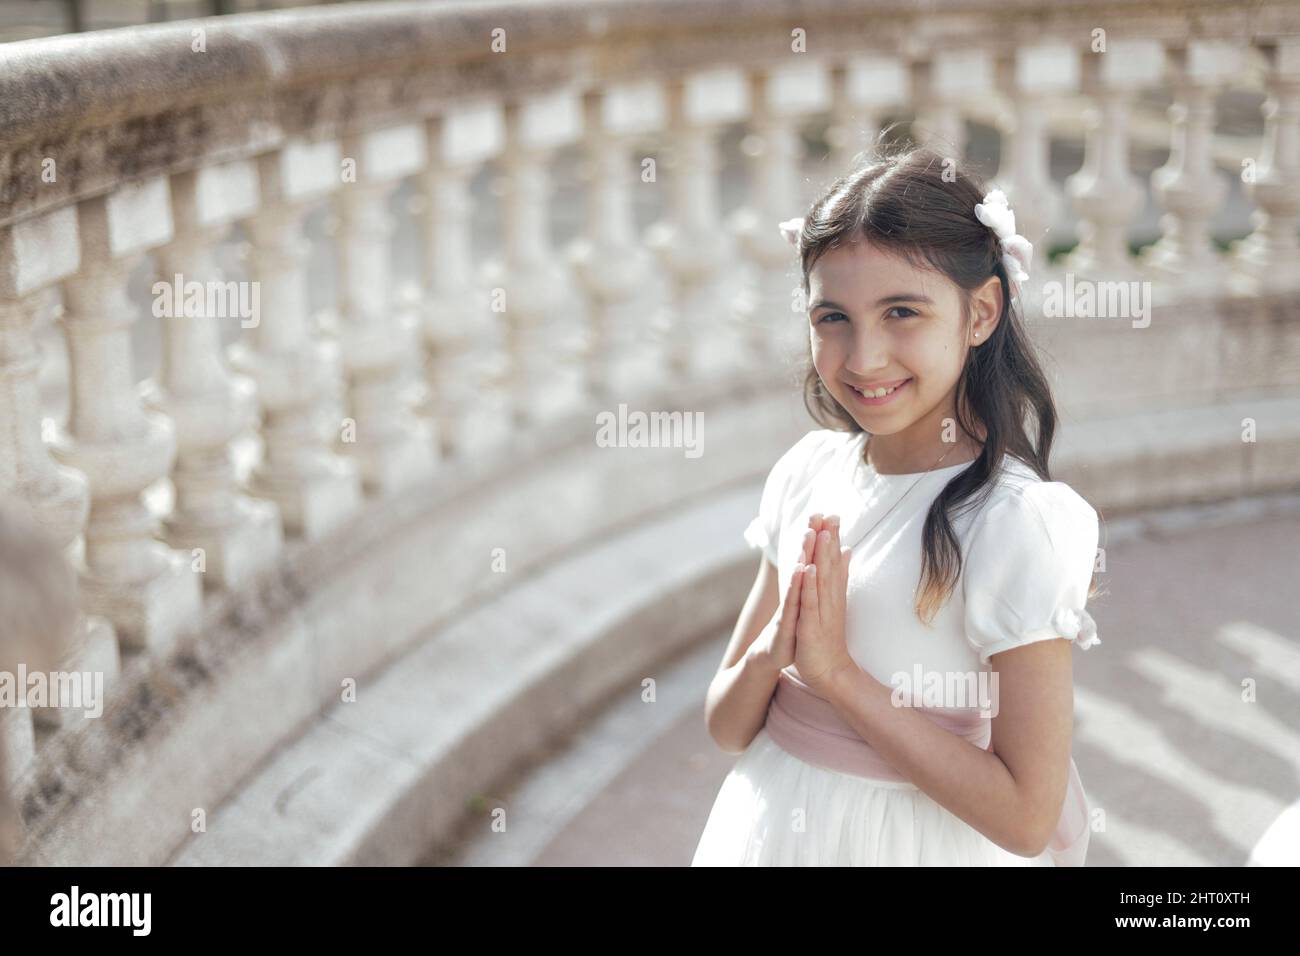 portrait of girl in communion dress with hands in prayer pose looking at camera with copy space Stock Photo